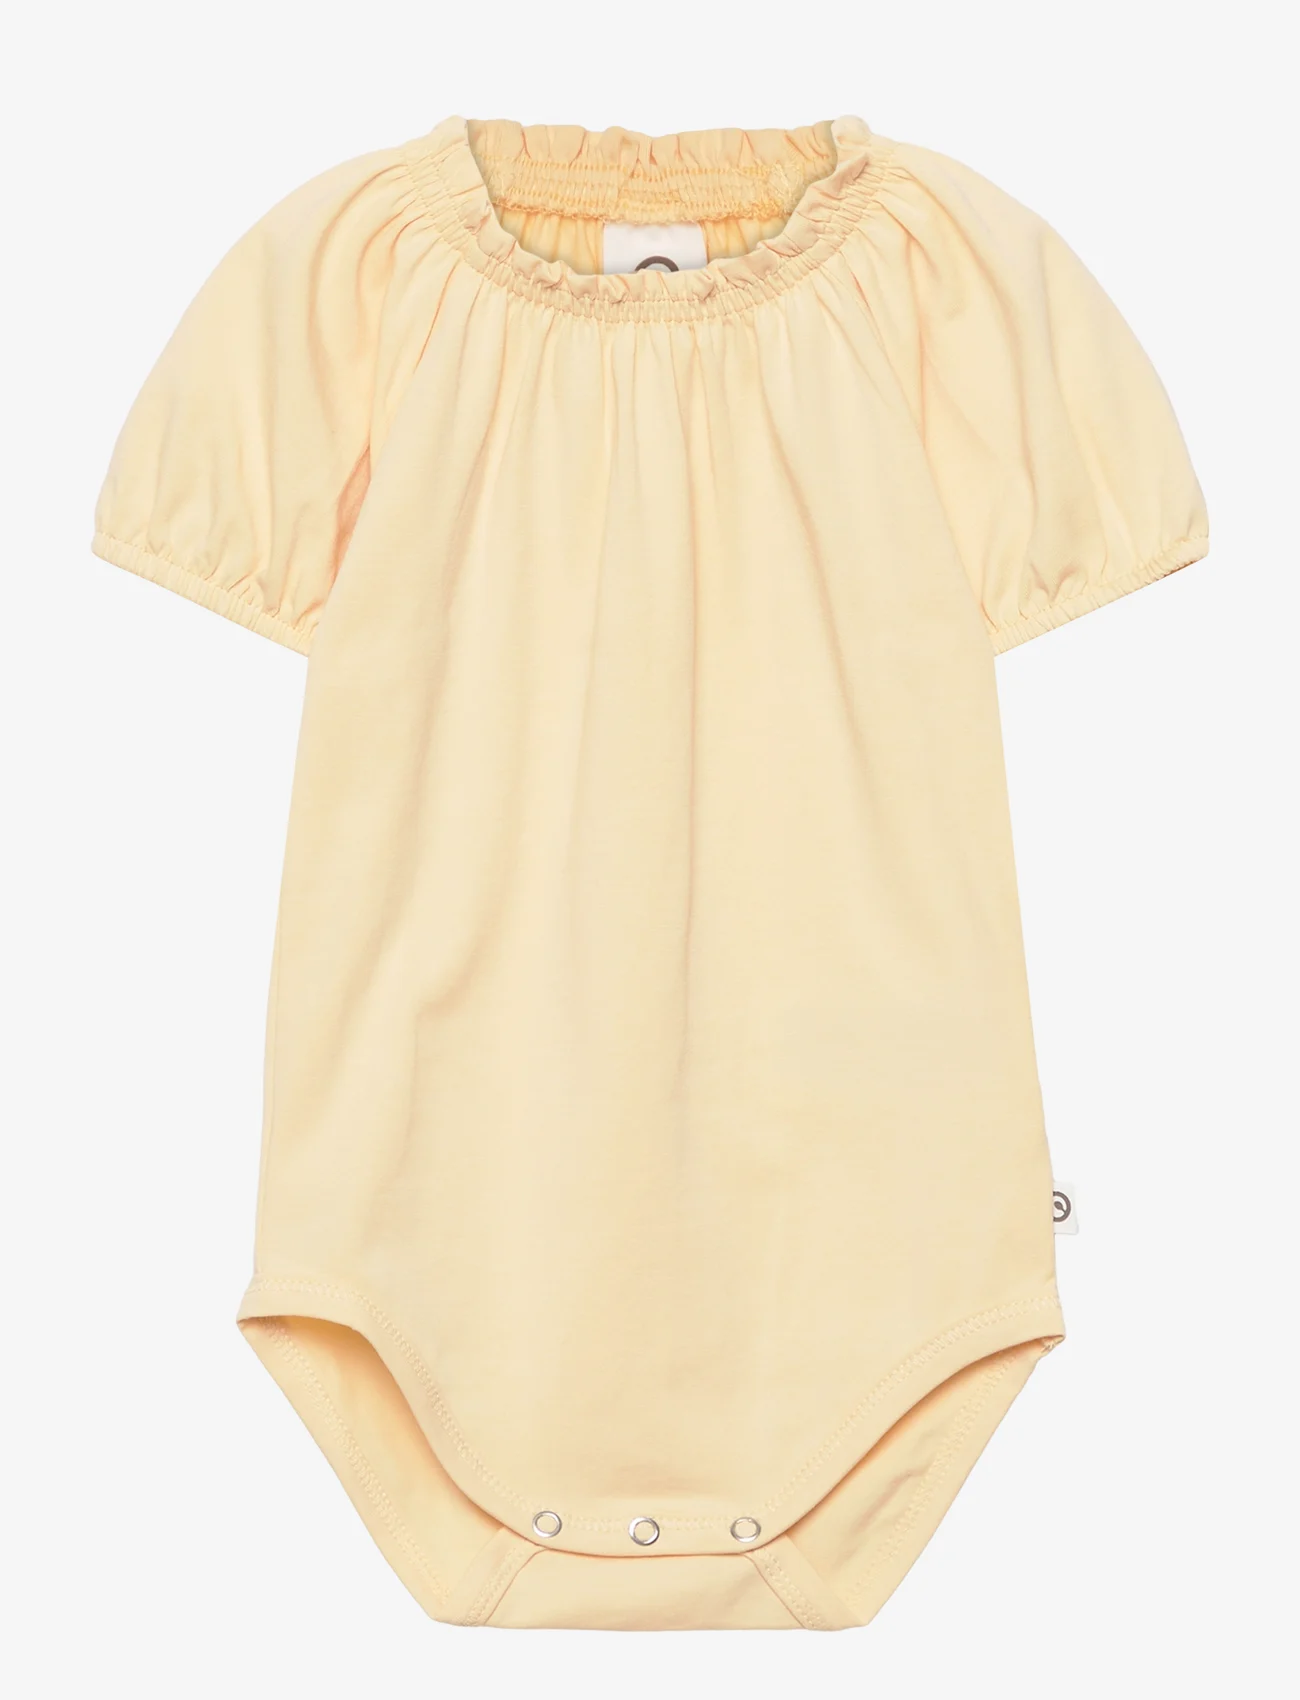 Müsli by Green Cotton - Cozy me bell s/s body - calm yellow - 0